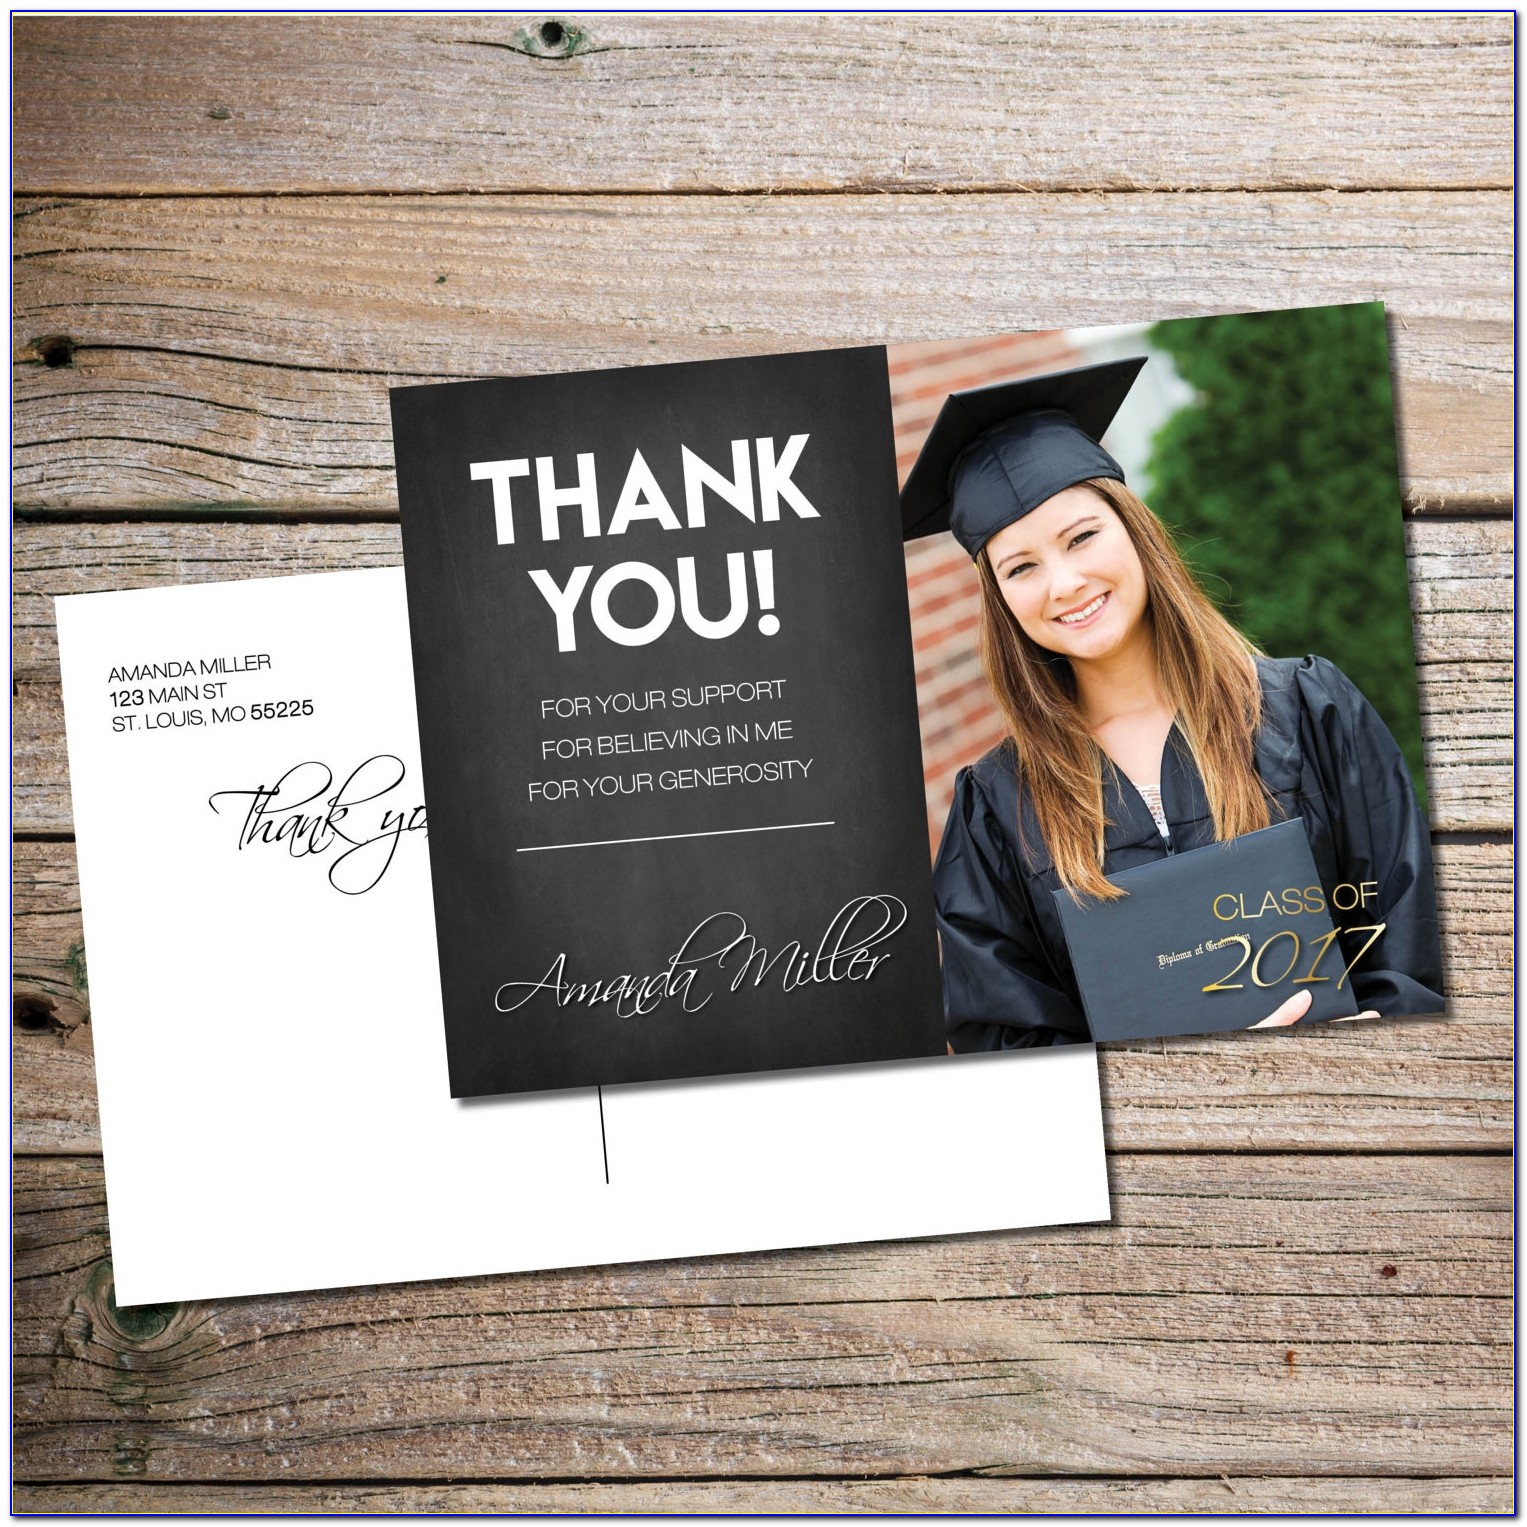 Graduation Invitations And Thank You Cards